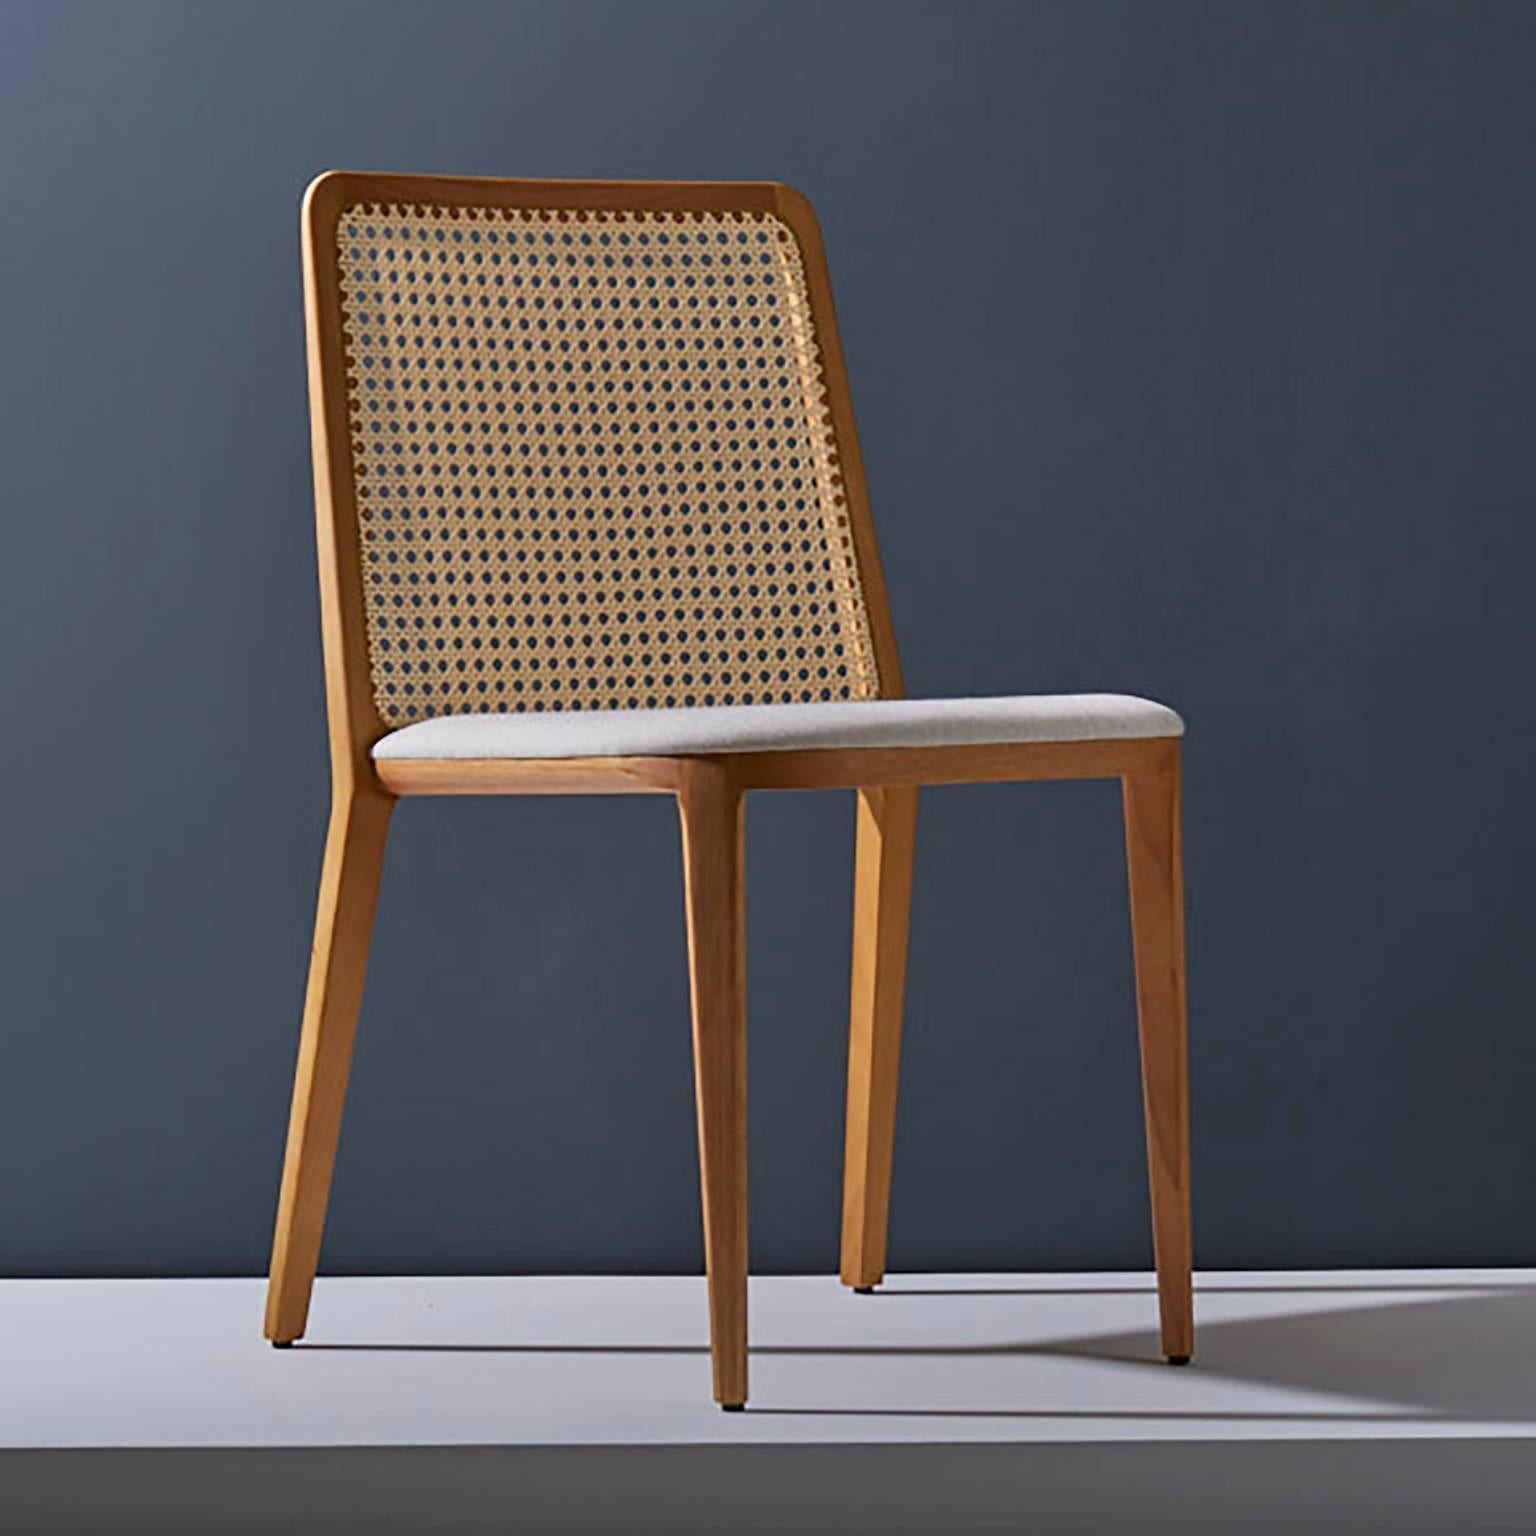 Minimal Style, Solid Wood Chair, Leather or Textile Seating, Caning Backboard For Sale 1